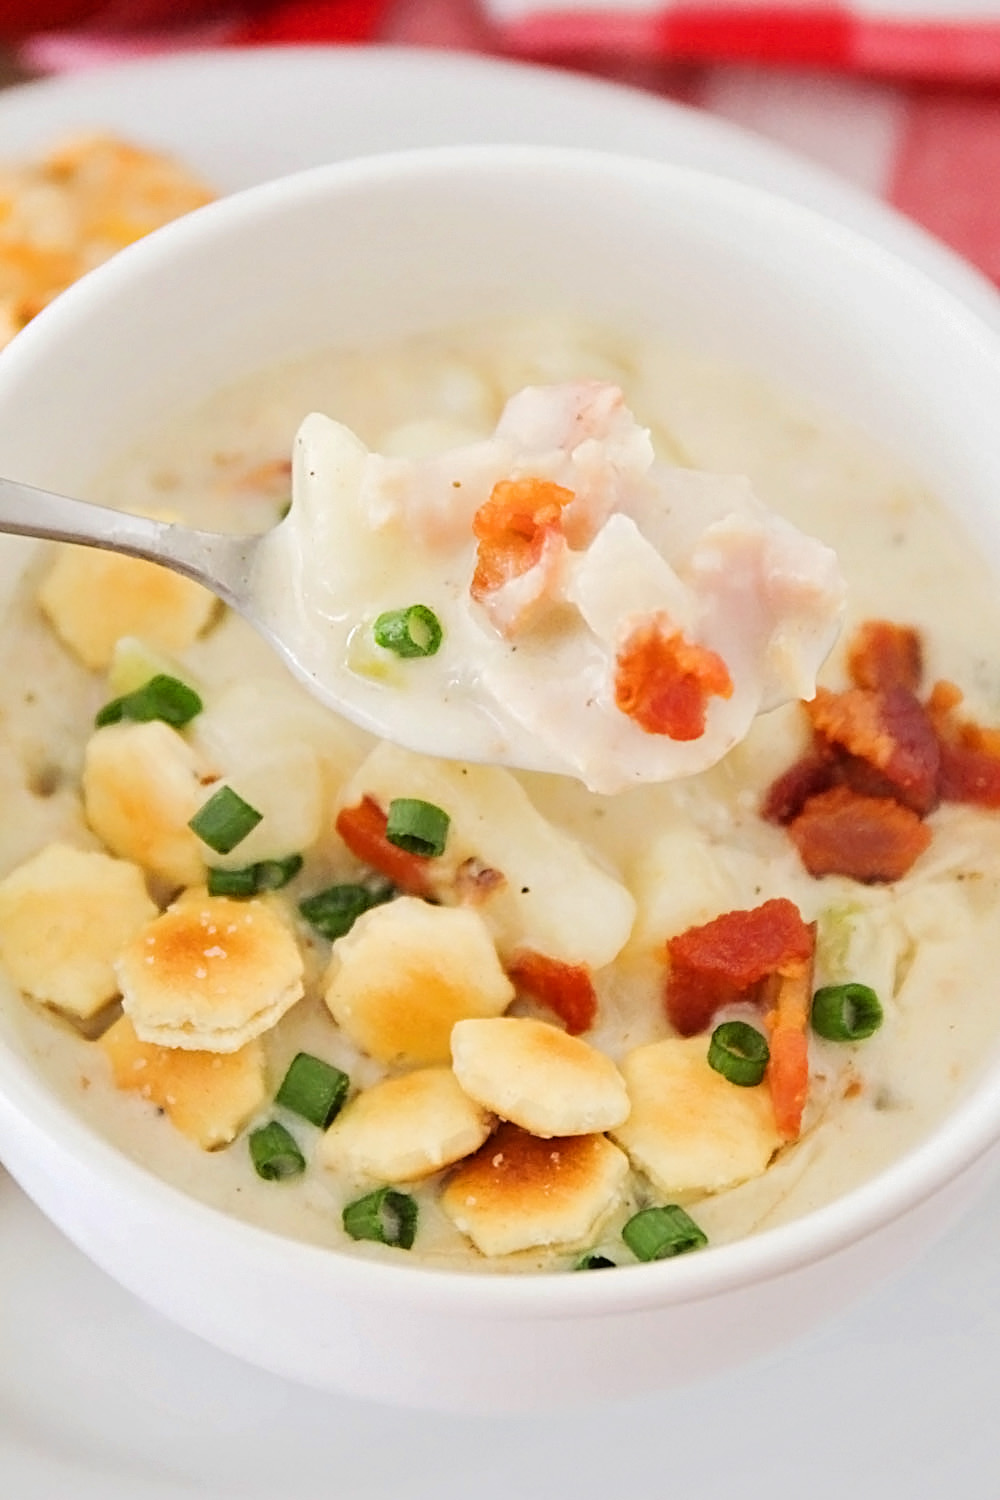 This savory and flavorful bacon clam chowder is quick and easy to make, and so delicious!